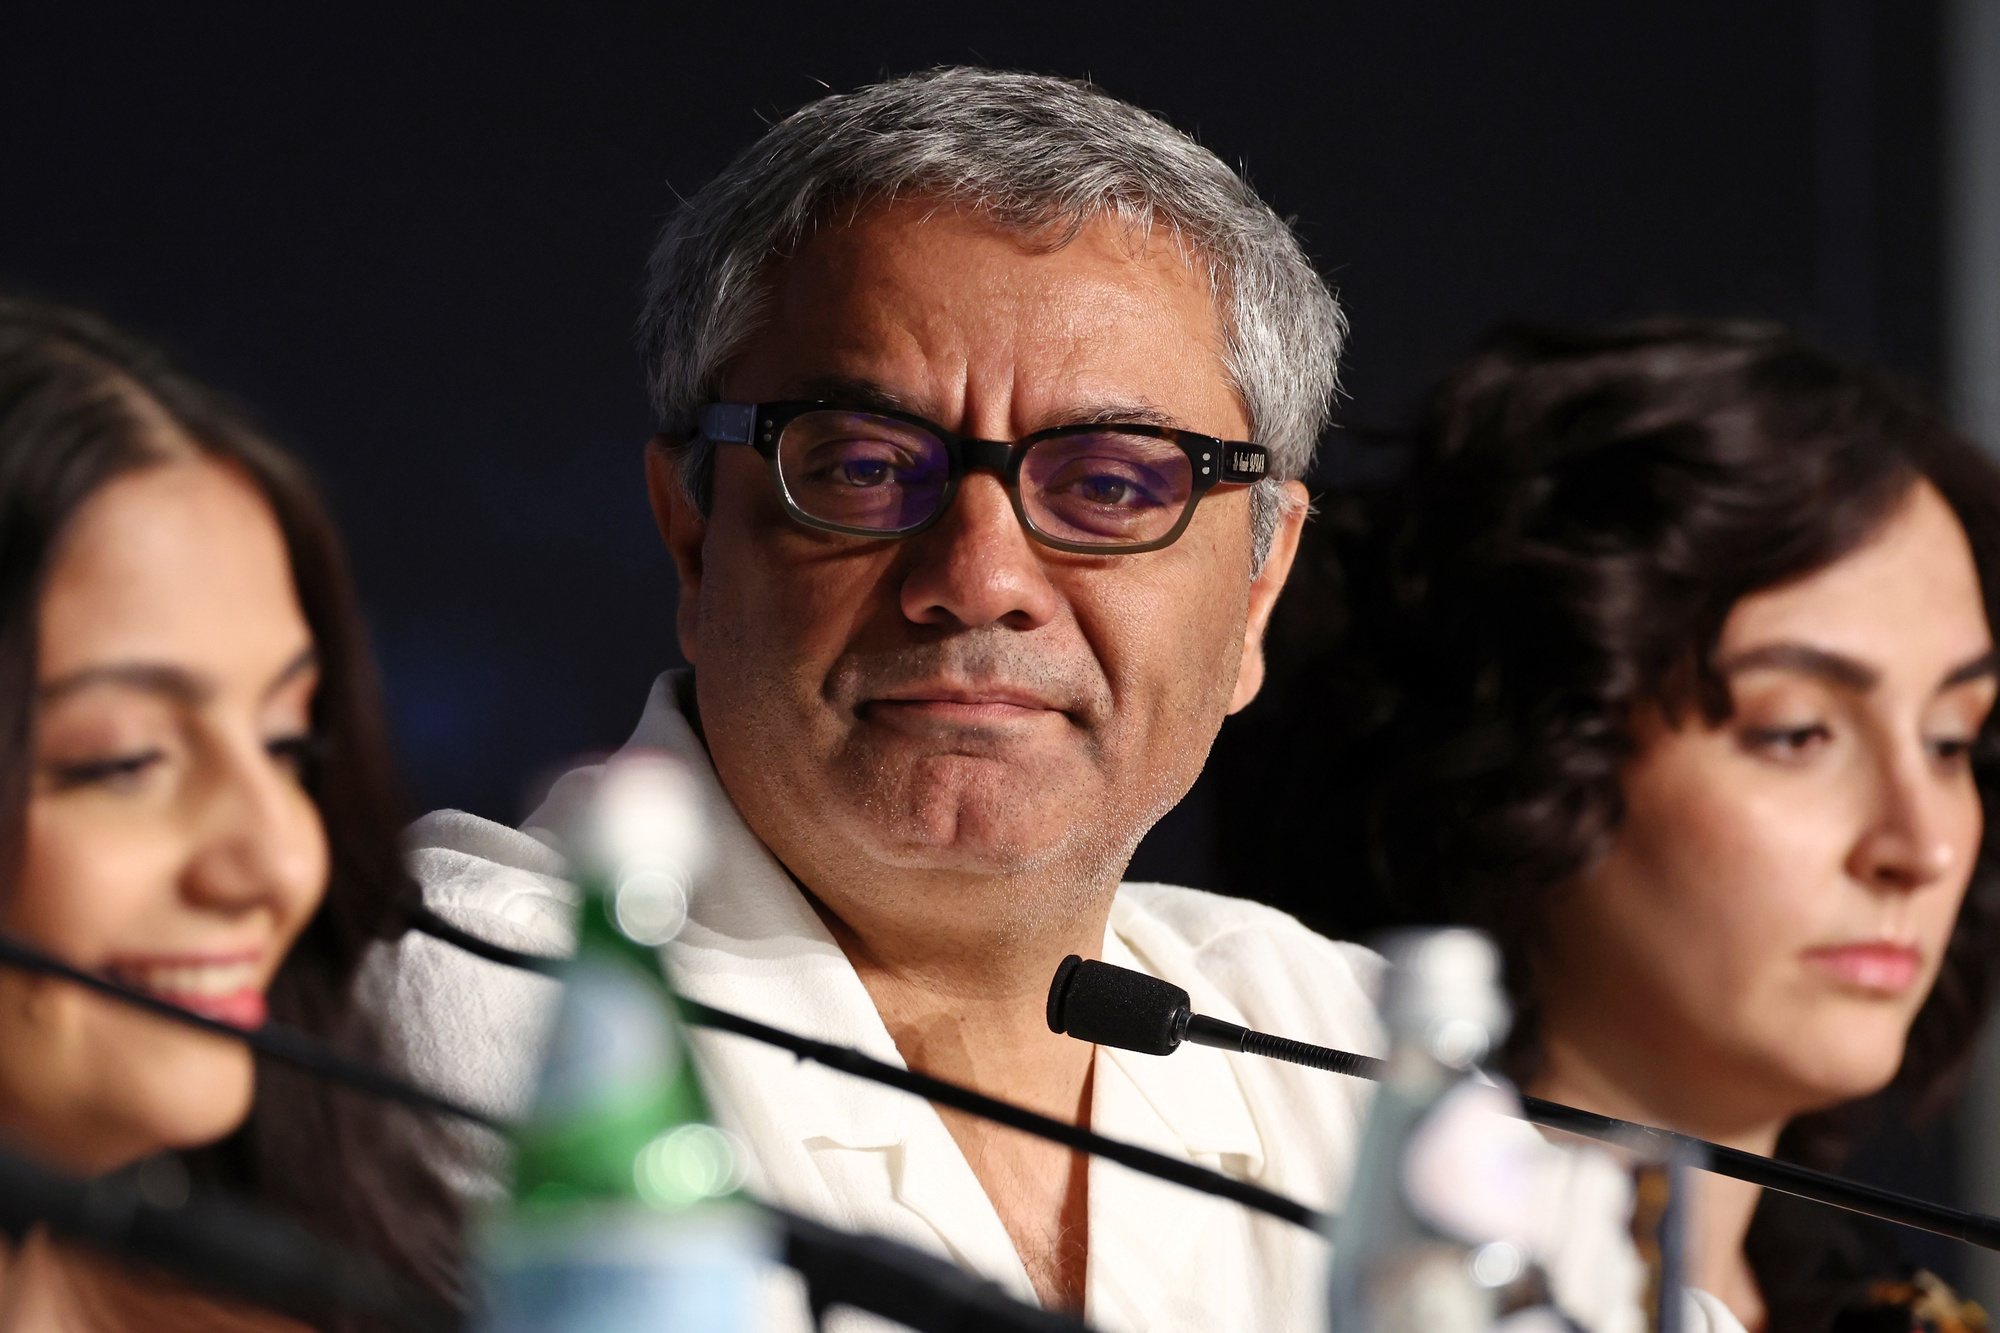 epa11367748 (L-R) Setareh Maleki, director Mohammad Rasoulof and Mahsa Rostami attend the press conference for &#039;The Seed Of The Sacred Fig&#039; during the 77th annual Cannes Film Festival, in Cannes, France, 25 May 2024. The movie is presented in competition at the film festival which runs from 14 to 25 May 2024.  EPA/CINDY ORD / POOL *** Local Caption *** CANNES, FRANCE - MAY 25: Mohammad Rasoulof attends &quot;The Seed Of The Sacred Fig&quot; press conference at the 77th annual Cannes Film Festival at Palais des Festivals on May 25, 2024 in Cannes, France. (Photo by Cindy Ord/Getty Images)